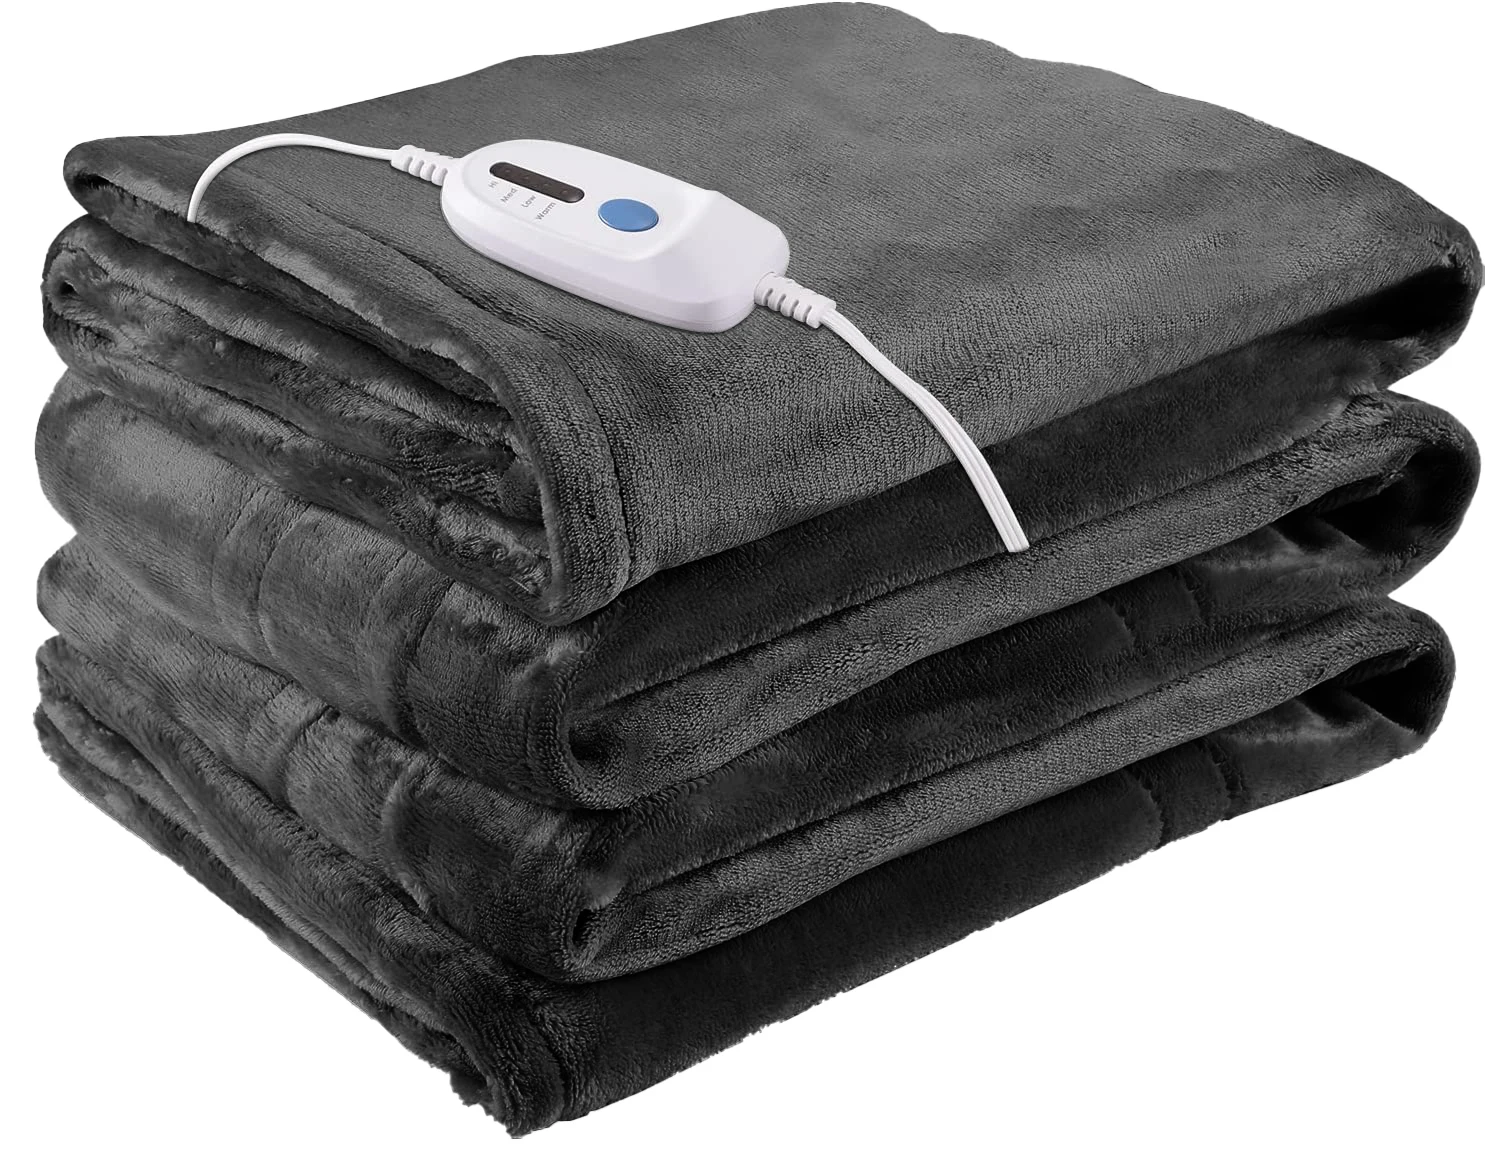 120V 4 Heat Setting 10 hours Auto Off Soft cozy Flannel  Electric Heated Throw Blanket